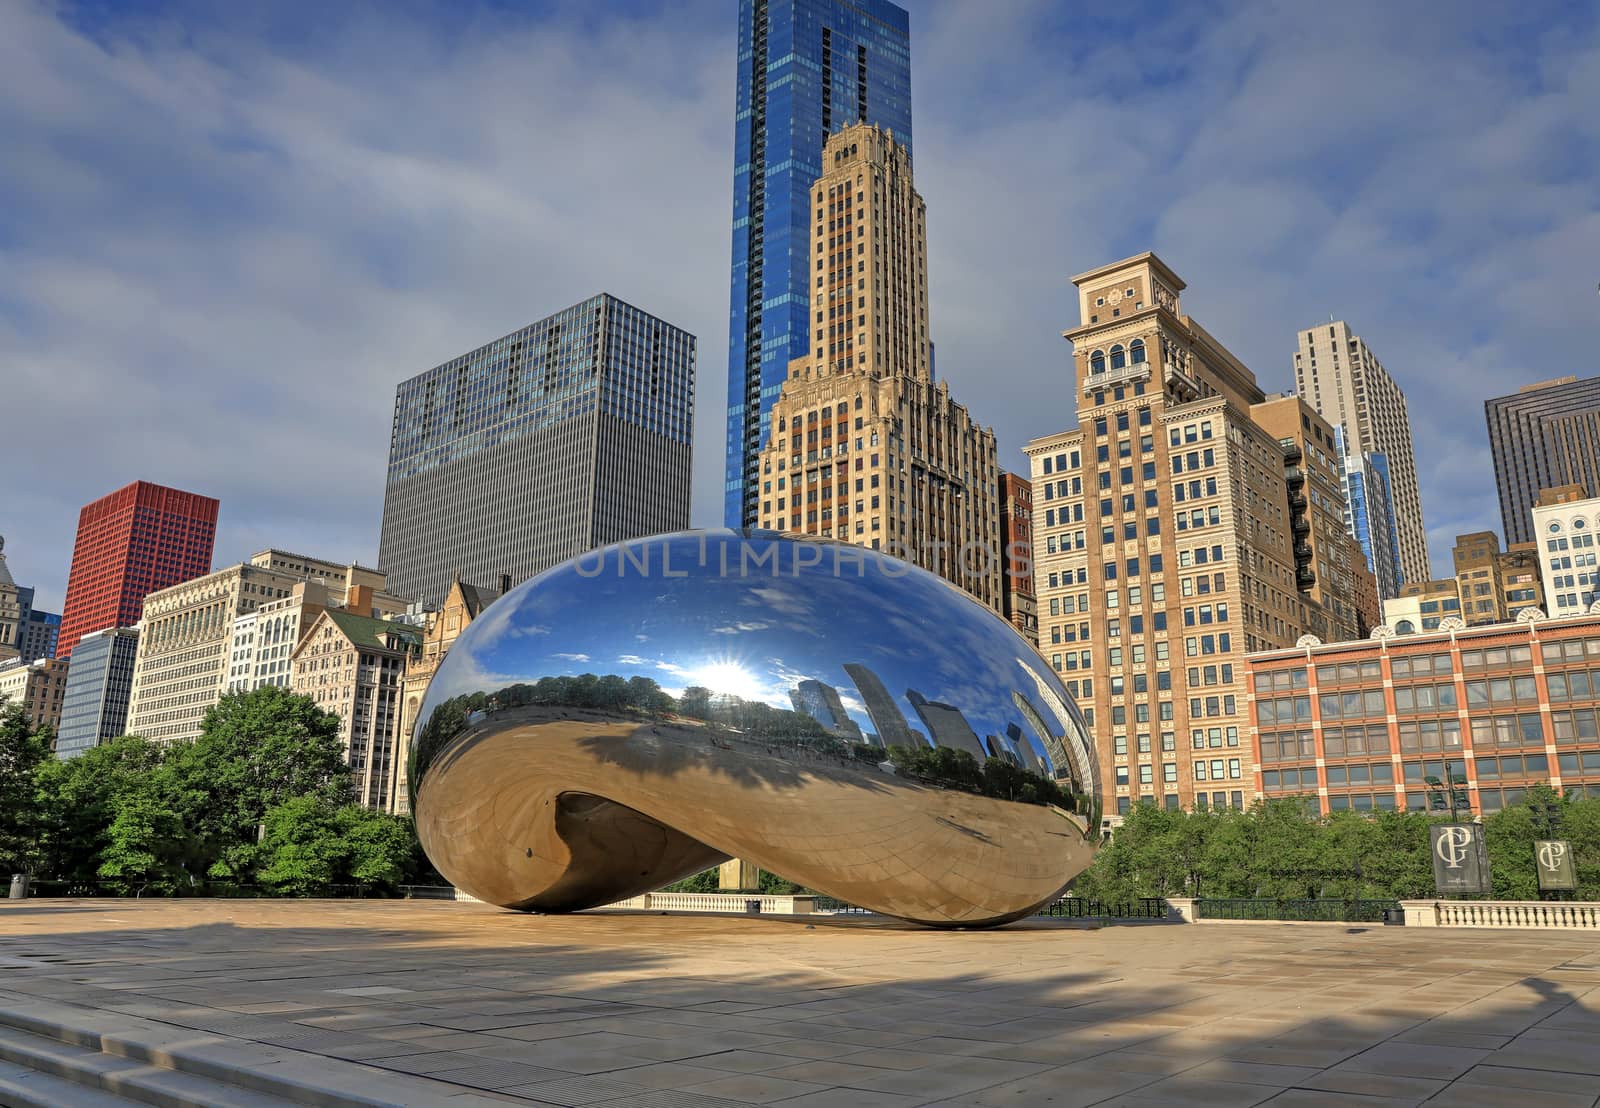 Cloud Gate in Chicago, Illinois by jbyard22